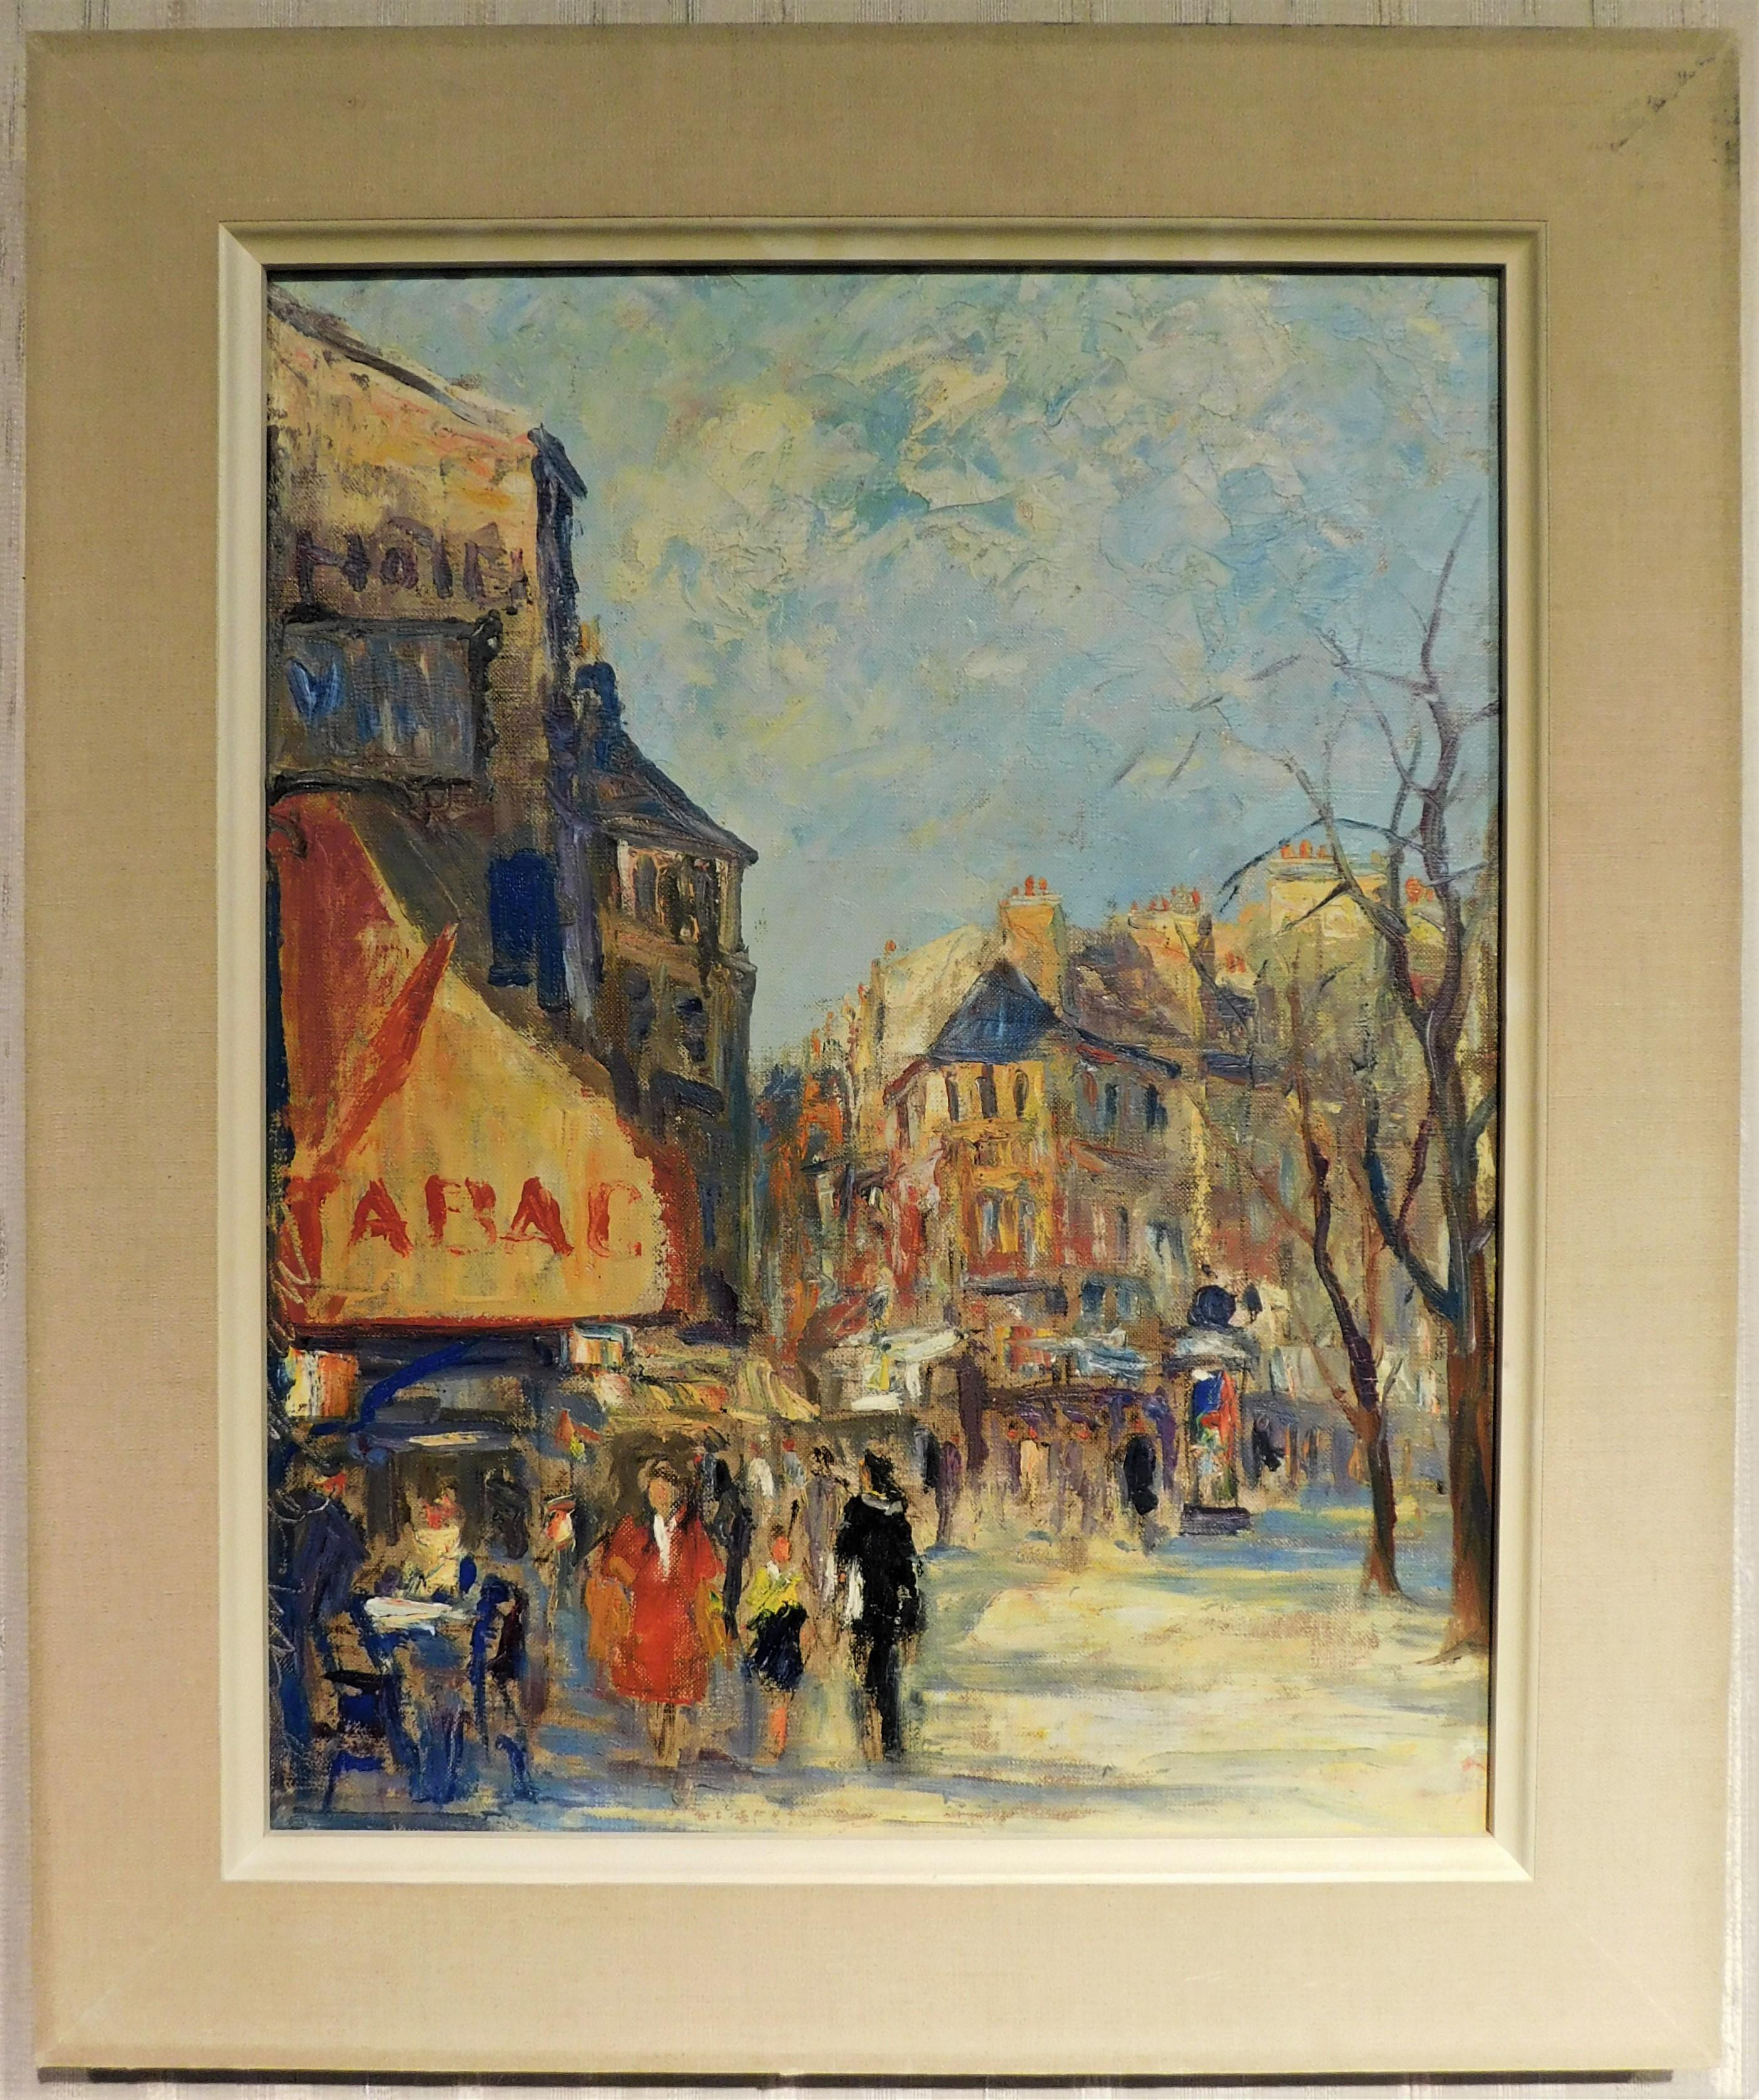 Original oil on canvas signed Jean Le Van along the lower left side of the painting. Jean Le Van is a known and listed pseudonym for Ernst Rasmussen that he used while residing in Paris during the 1940's. The scene pictured is of Paris, France and